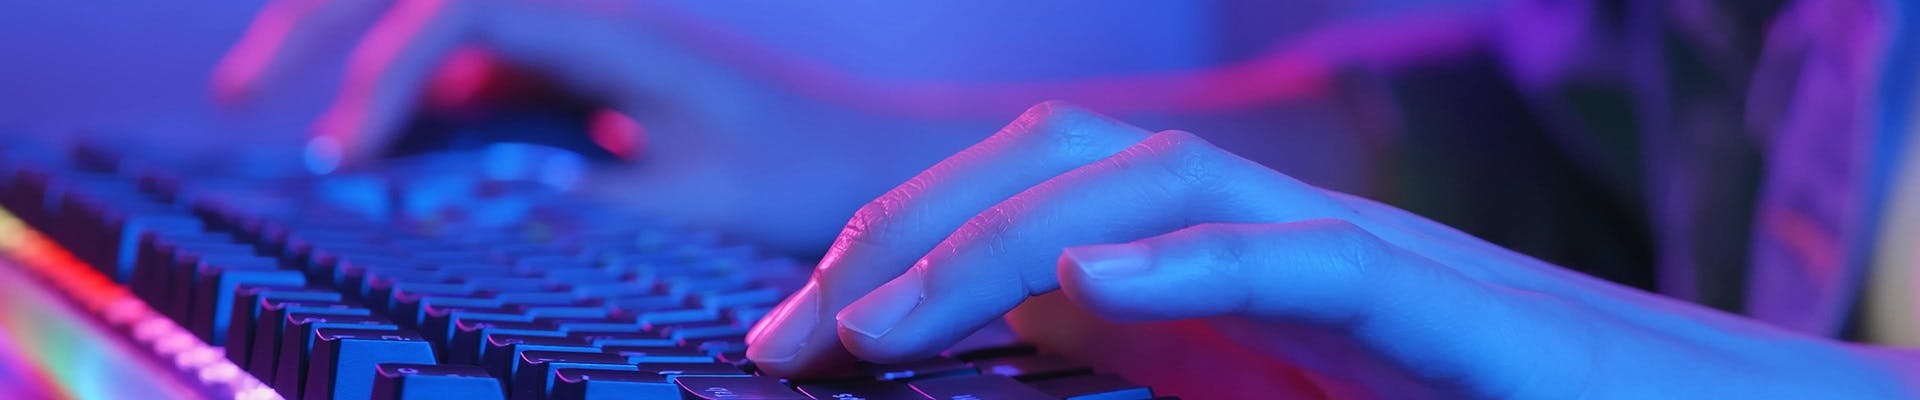 a close-up of a hand holding a keyboard